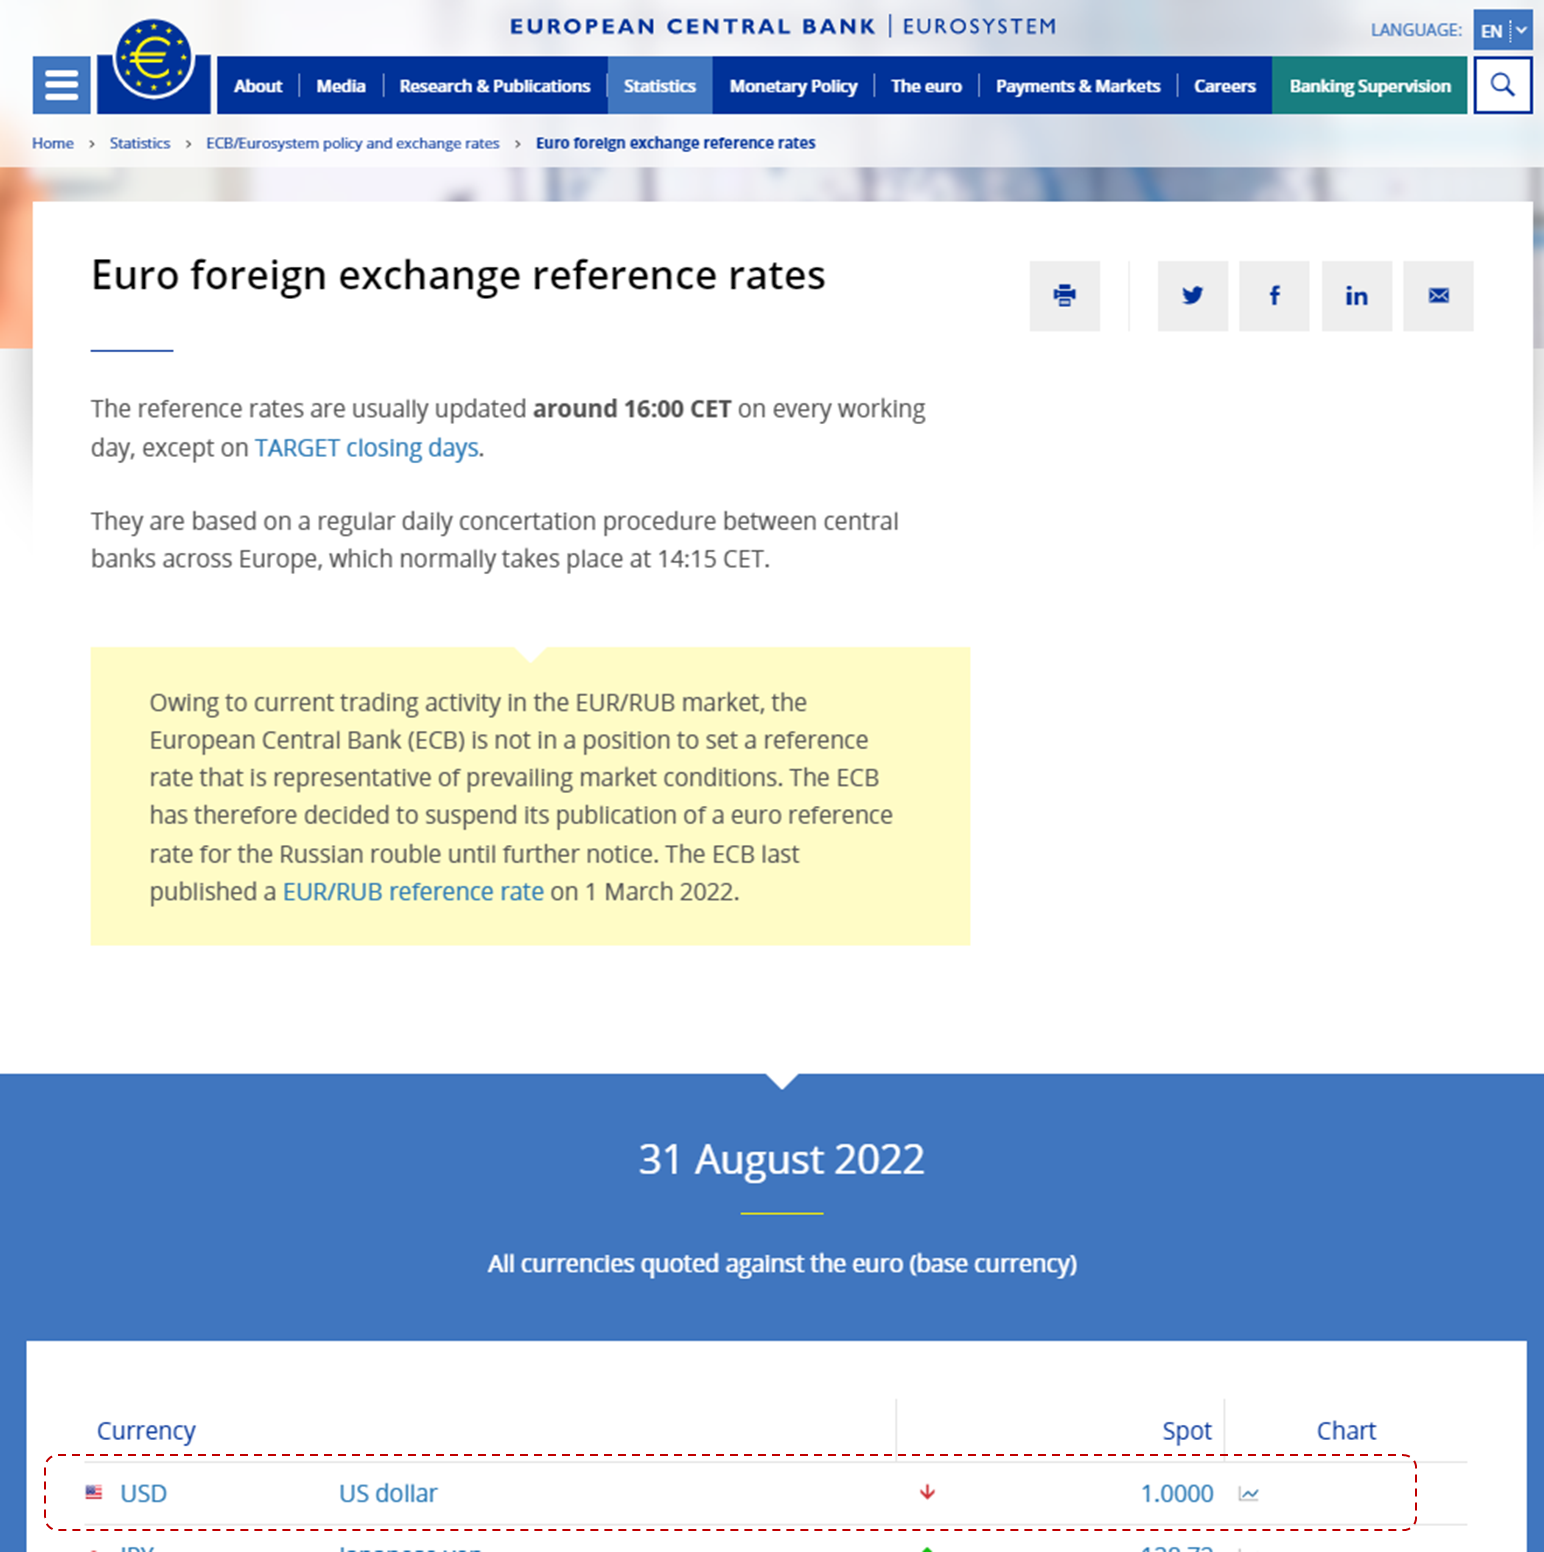 The official dollar exchange rate set by the European Central Bank on 31.08.2022 1 EUR = 1 USD - Dollar rate, Currency, Euro exchange rate